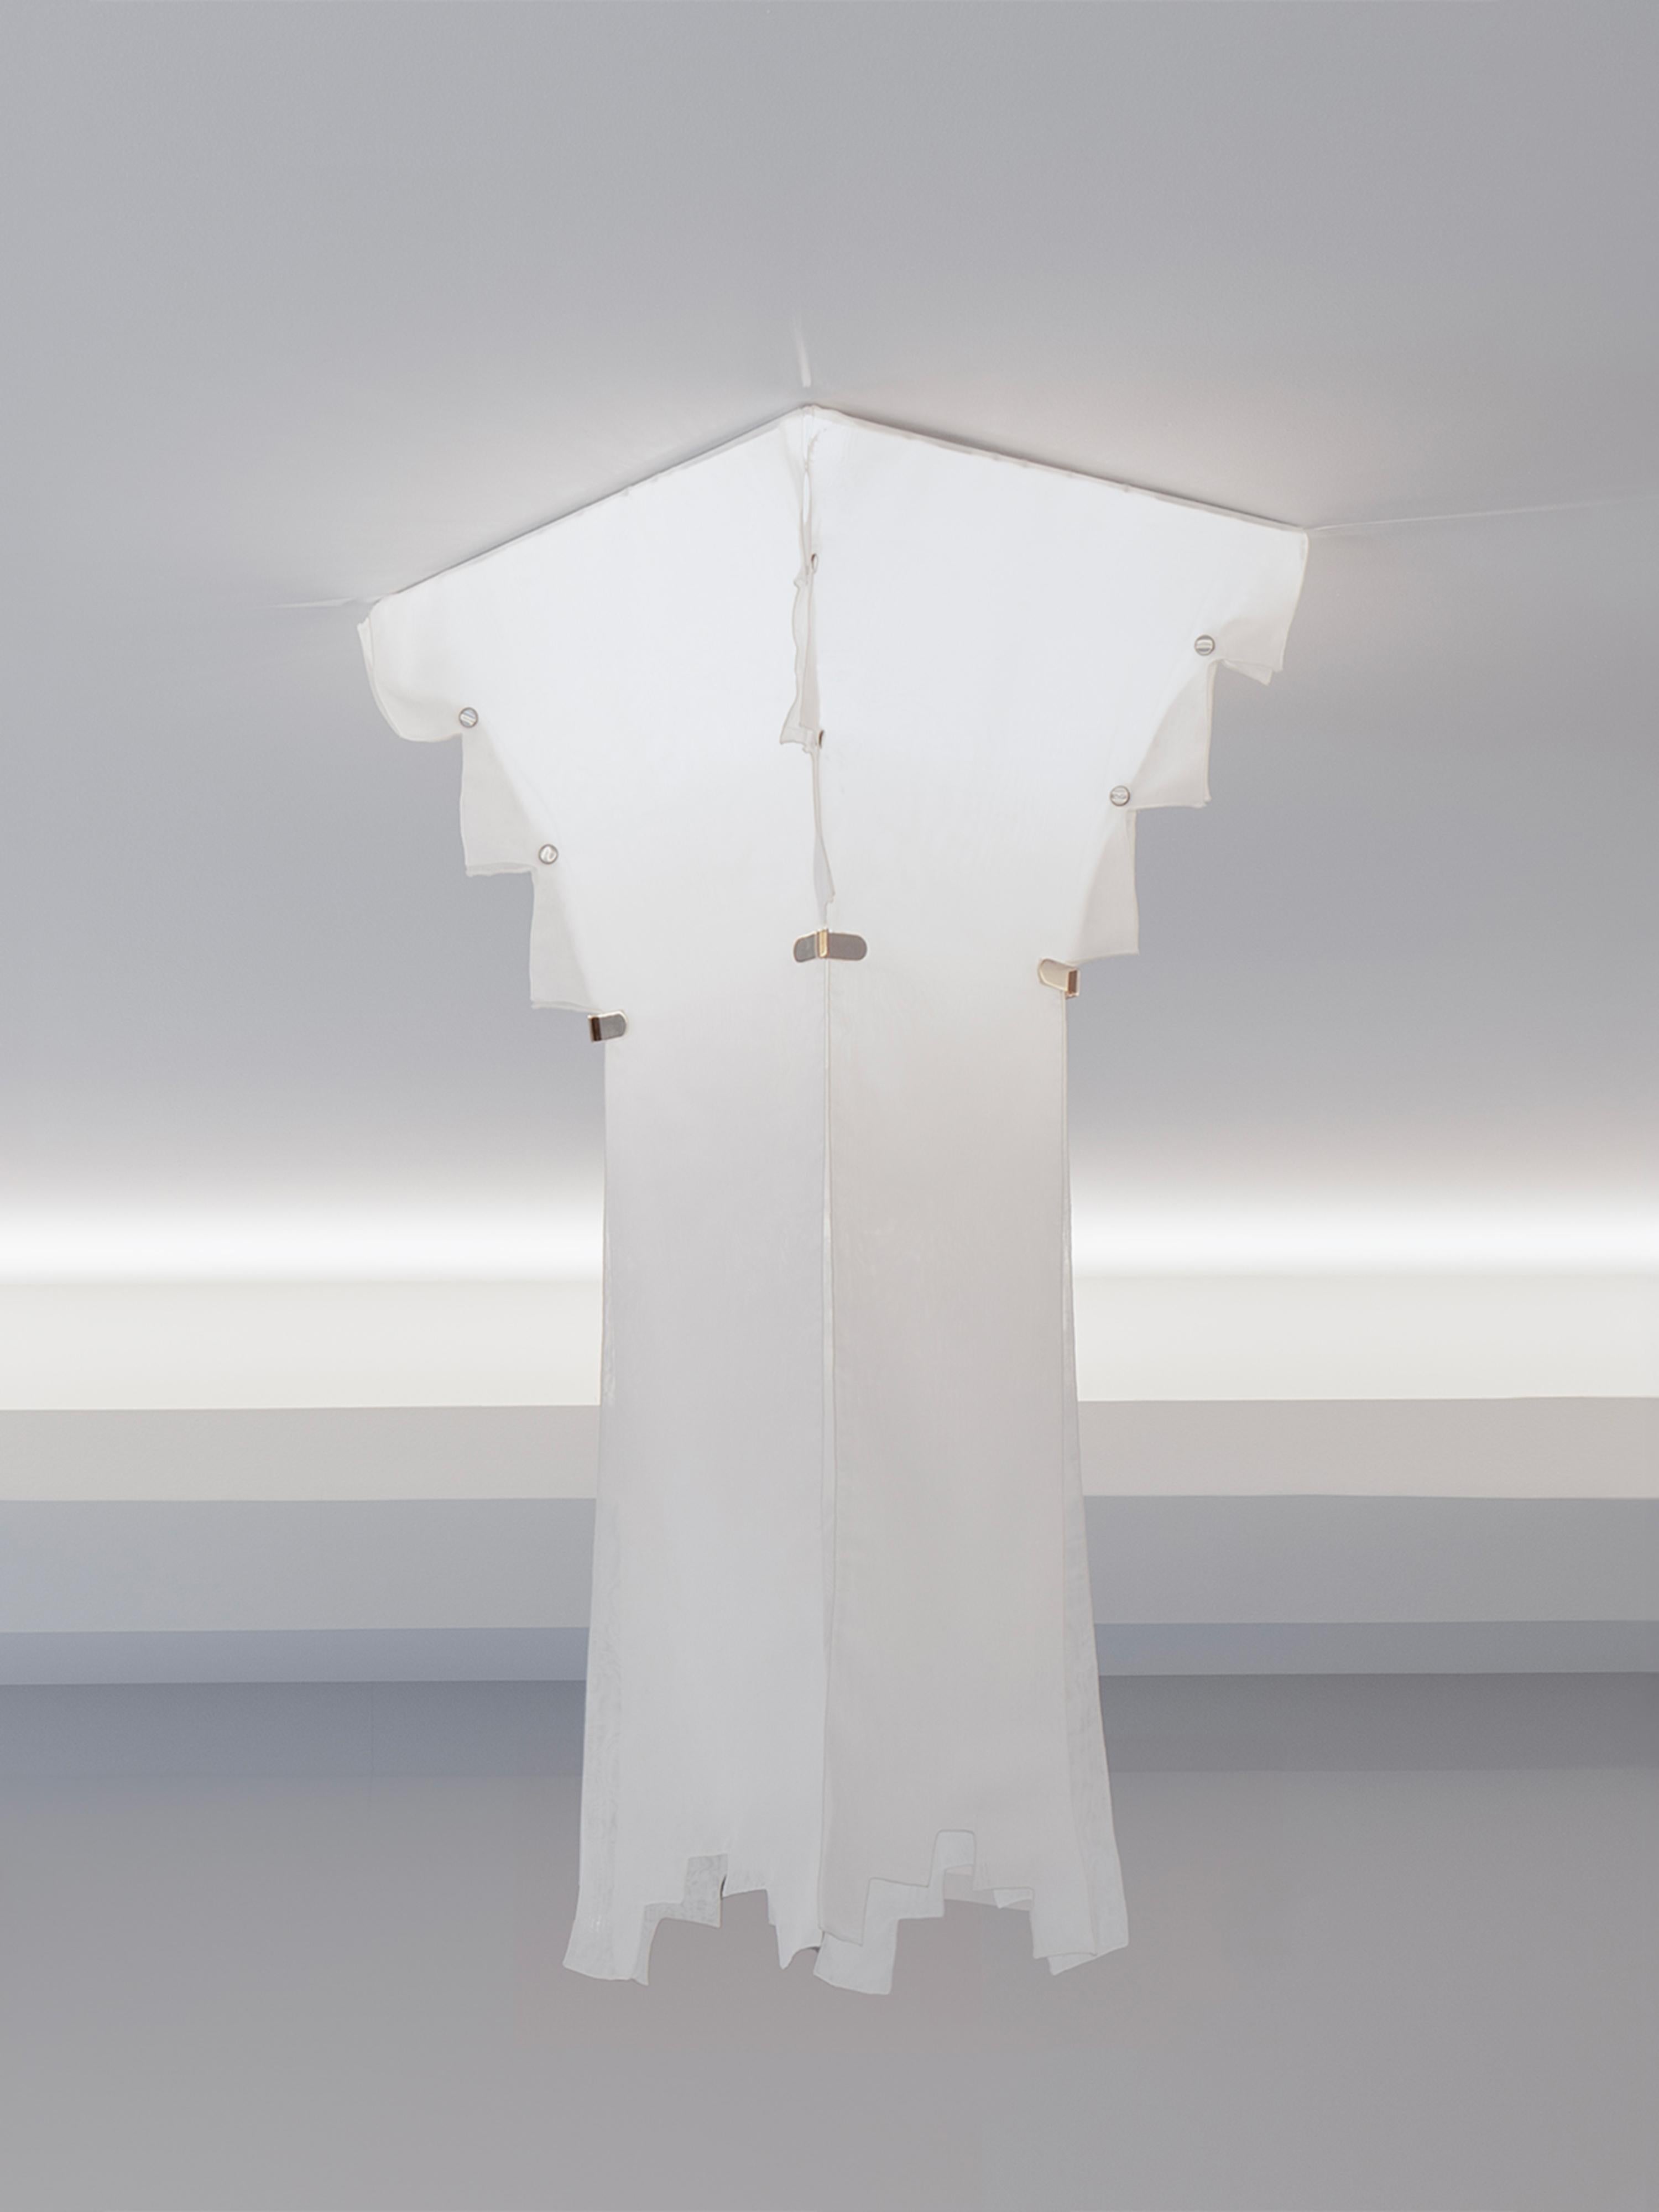 Designed in 1984 - Paradisoterrestre Edition 2023

Materials: lacquered metal structure, metal clips with brass finishing, nacre buttons, organza curtains, 1 bulb E14 led

Designed by Japanese architect and designer Kazuhide Takahama for the